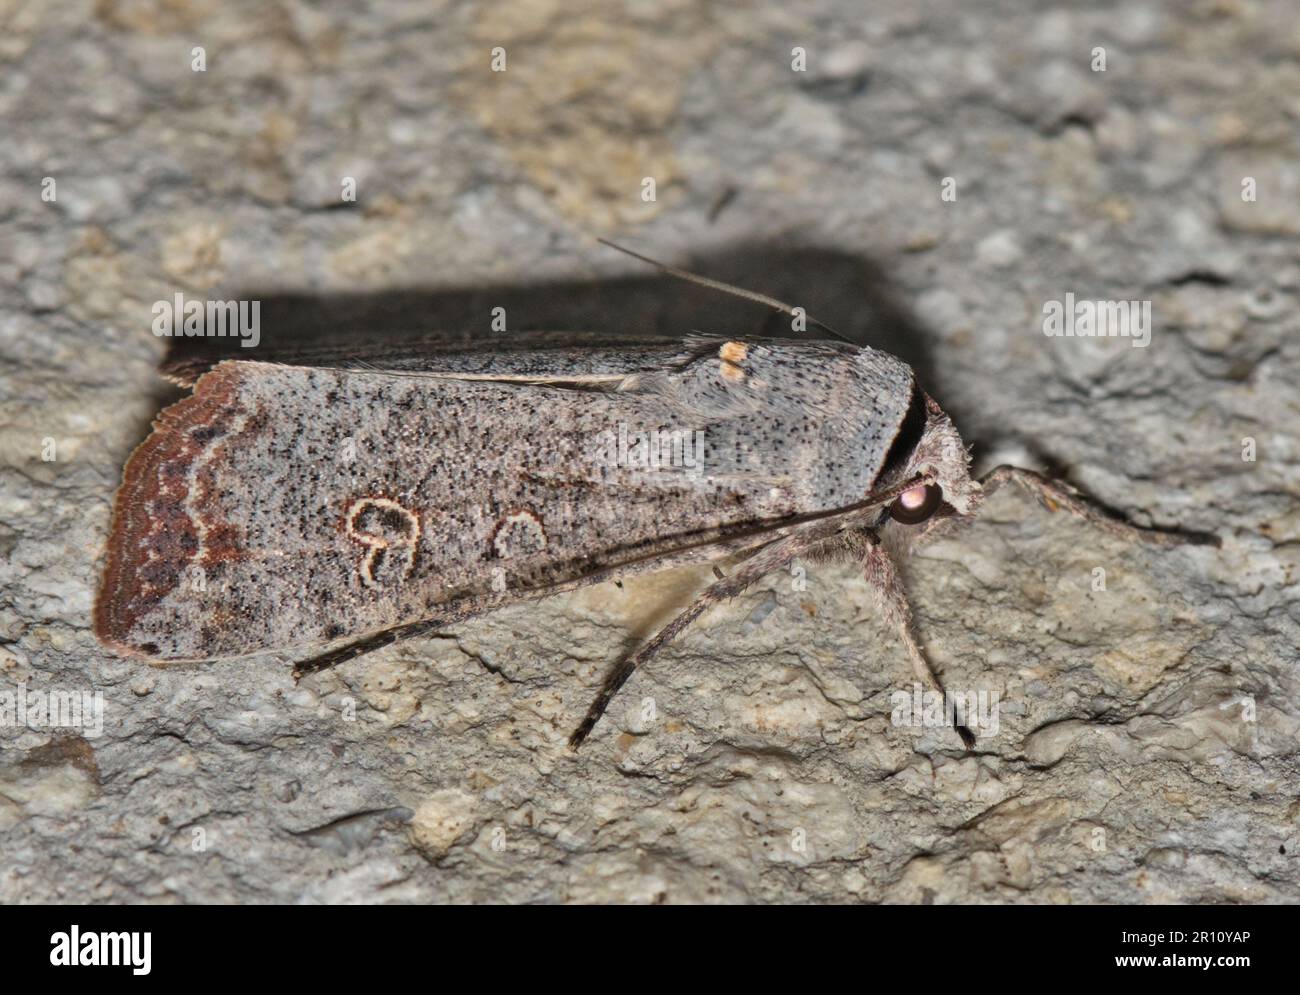 Green Cutworm Moth (Anicla infecta) side view on a cement wall. Destructive insect pest species found in the USA, Canada and Uruguay. Stock Photo